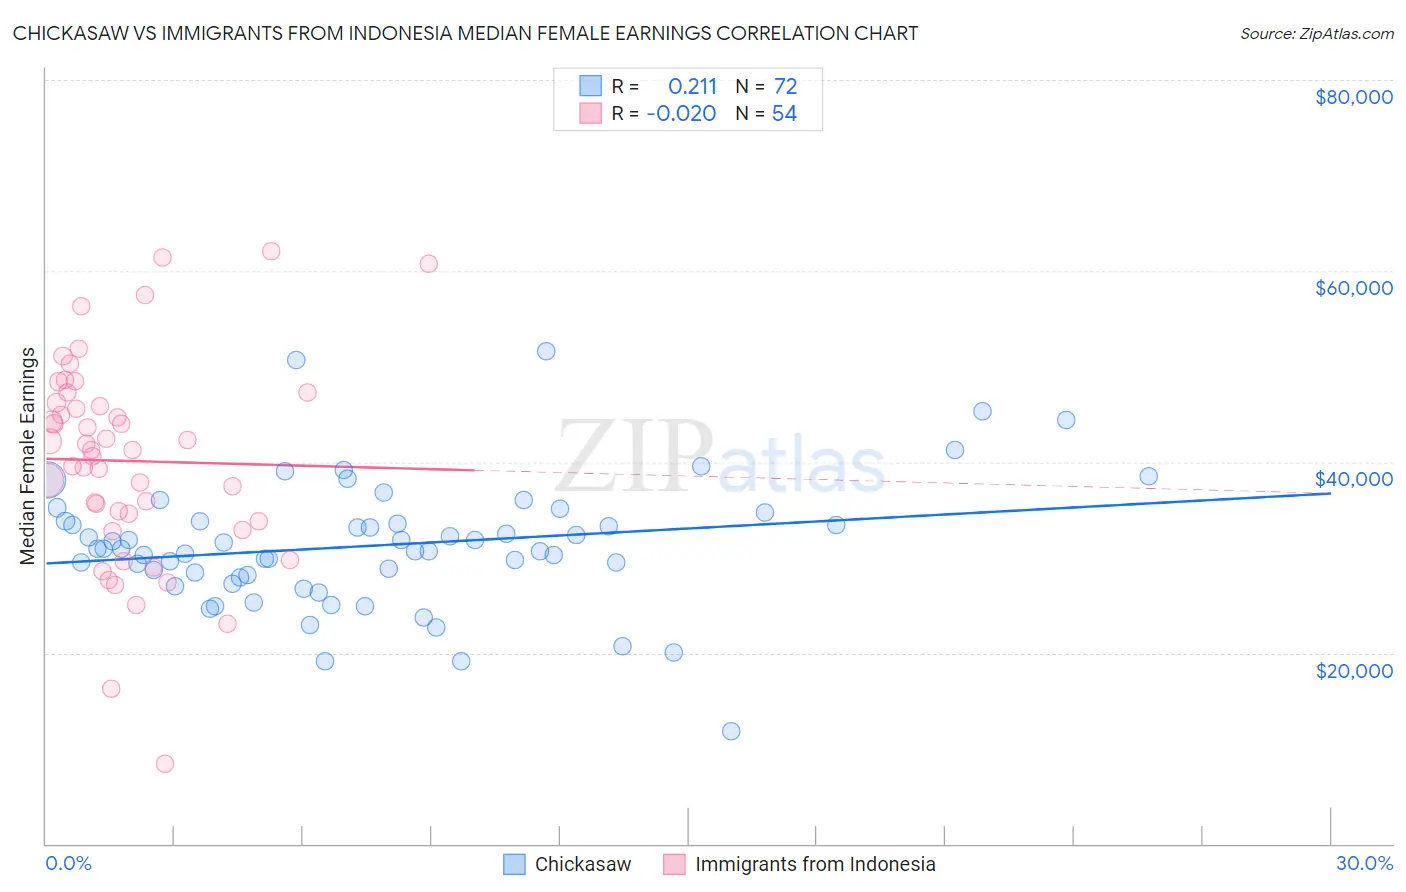 Chickasaw vs Immigrants from Indonesia Median Female Earnings